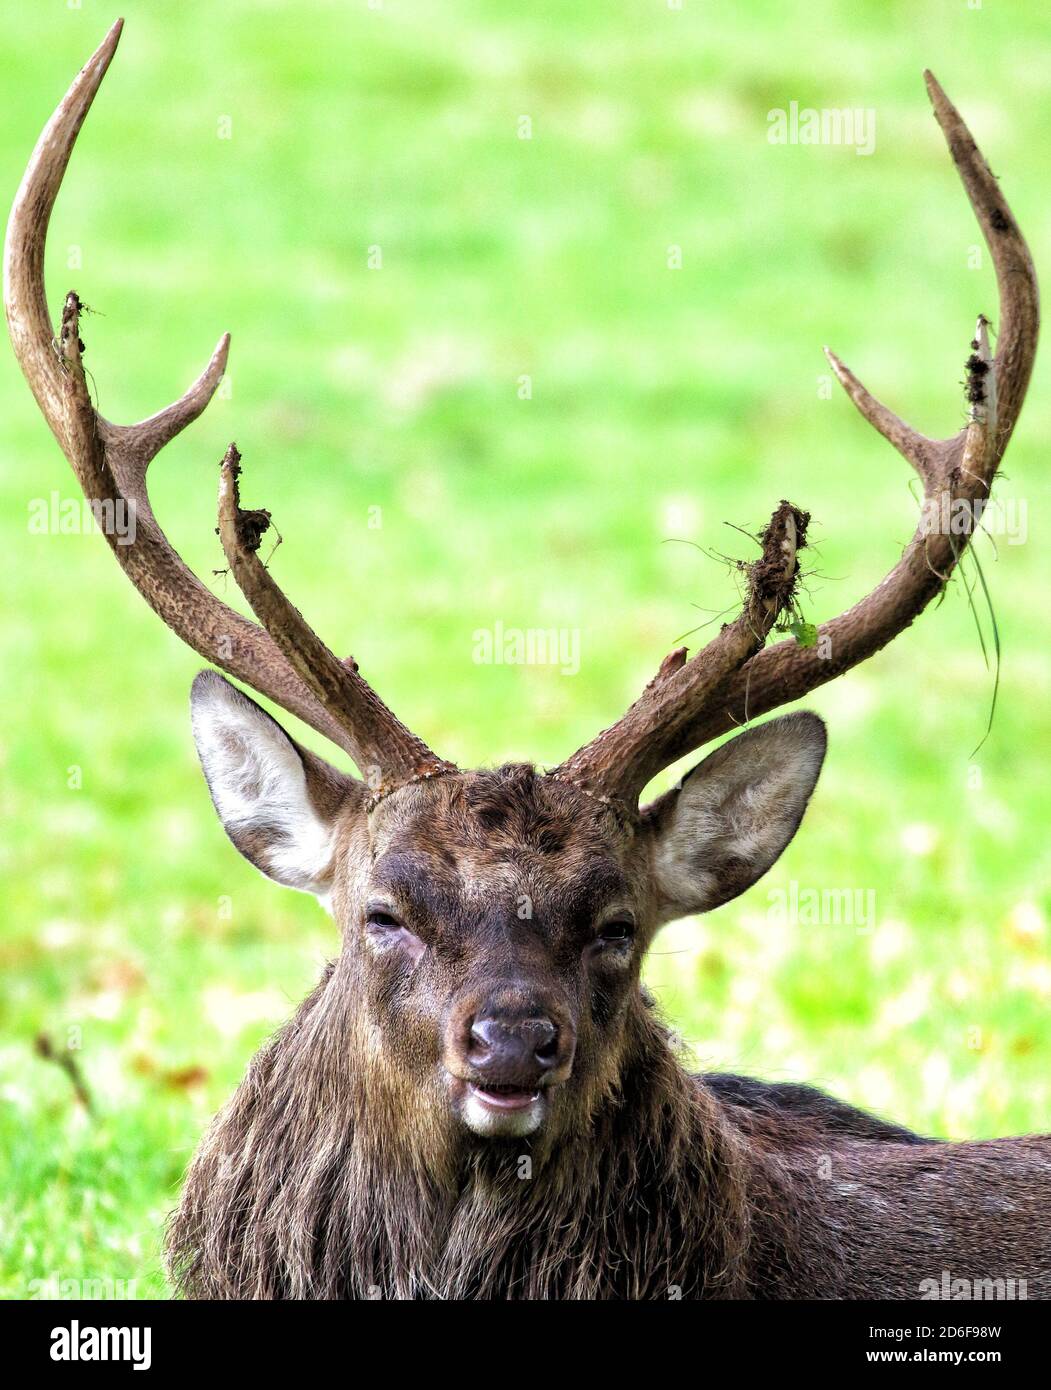 Woburn, UK. 16th Oct, 2020. Red Deer at Woburn Deer Park in Bedfordshire at the start of the rutting season. Woburn, Bedfordshire, UK. October 16th 2020 Credit: KEITH MAYHEW/Alamy Live News Stock Photo